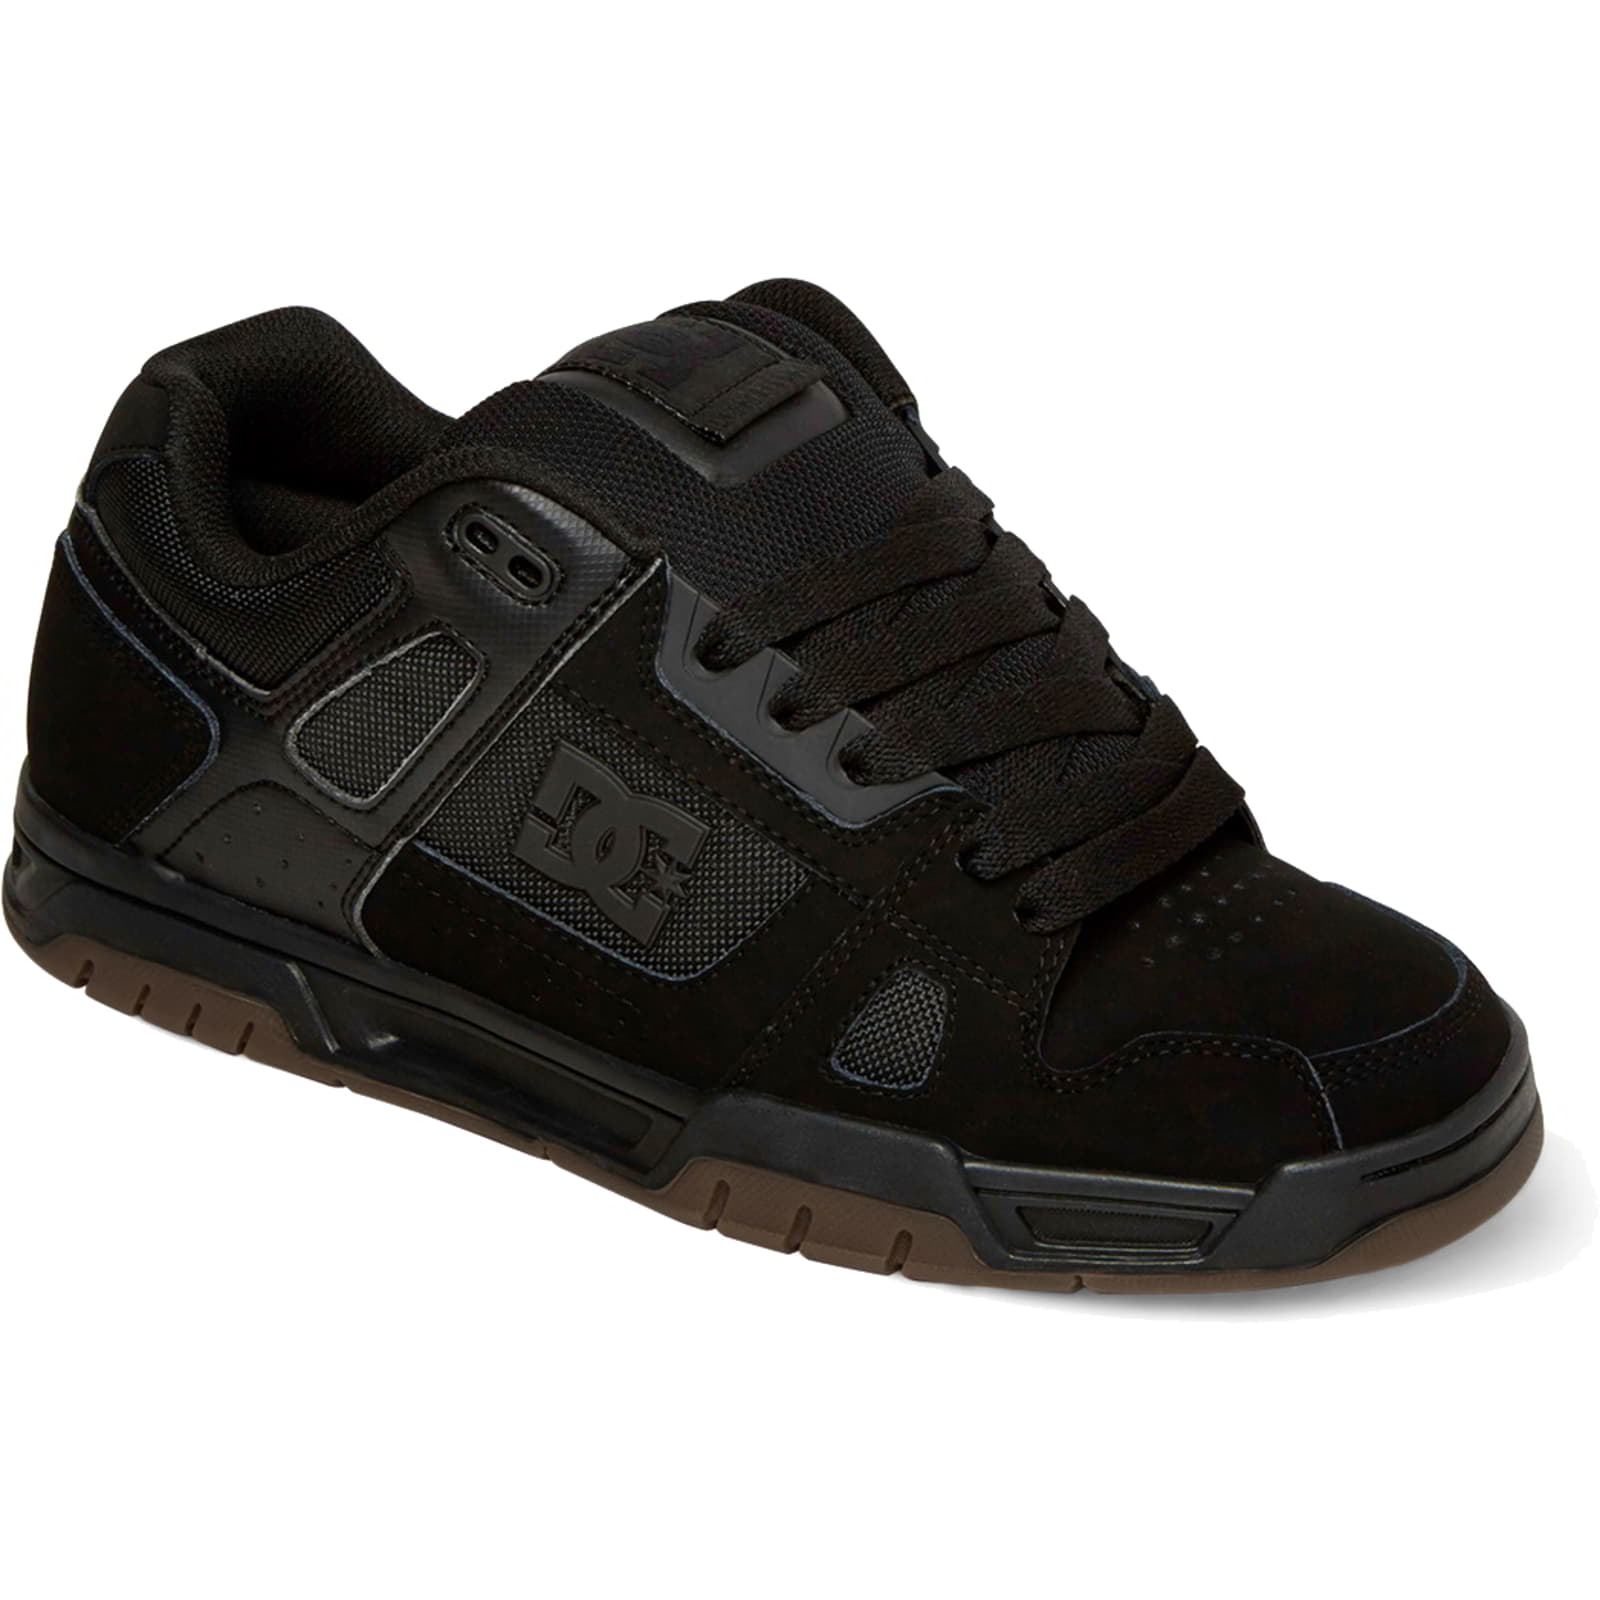 DC Men's Stag Skate Shoes Trainers - UK 8.5 / US 9.5